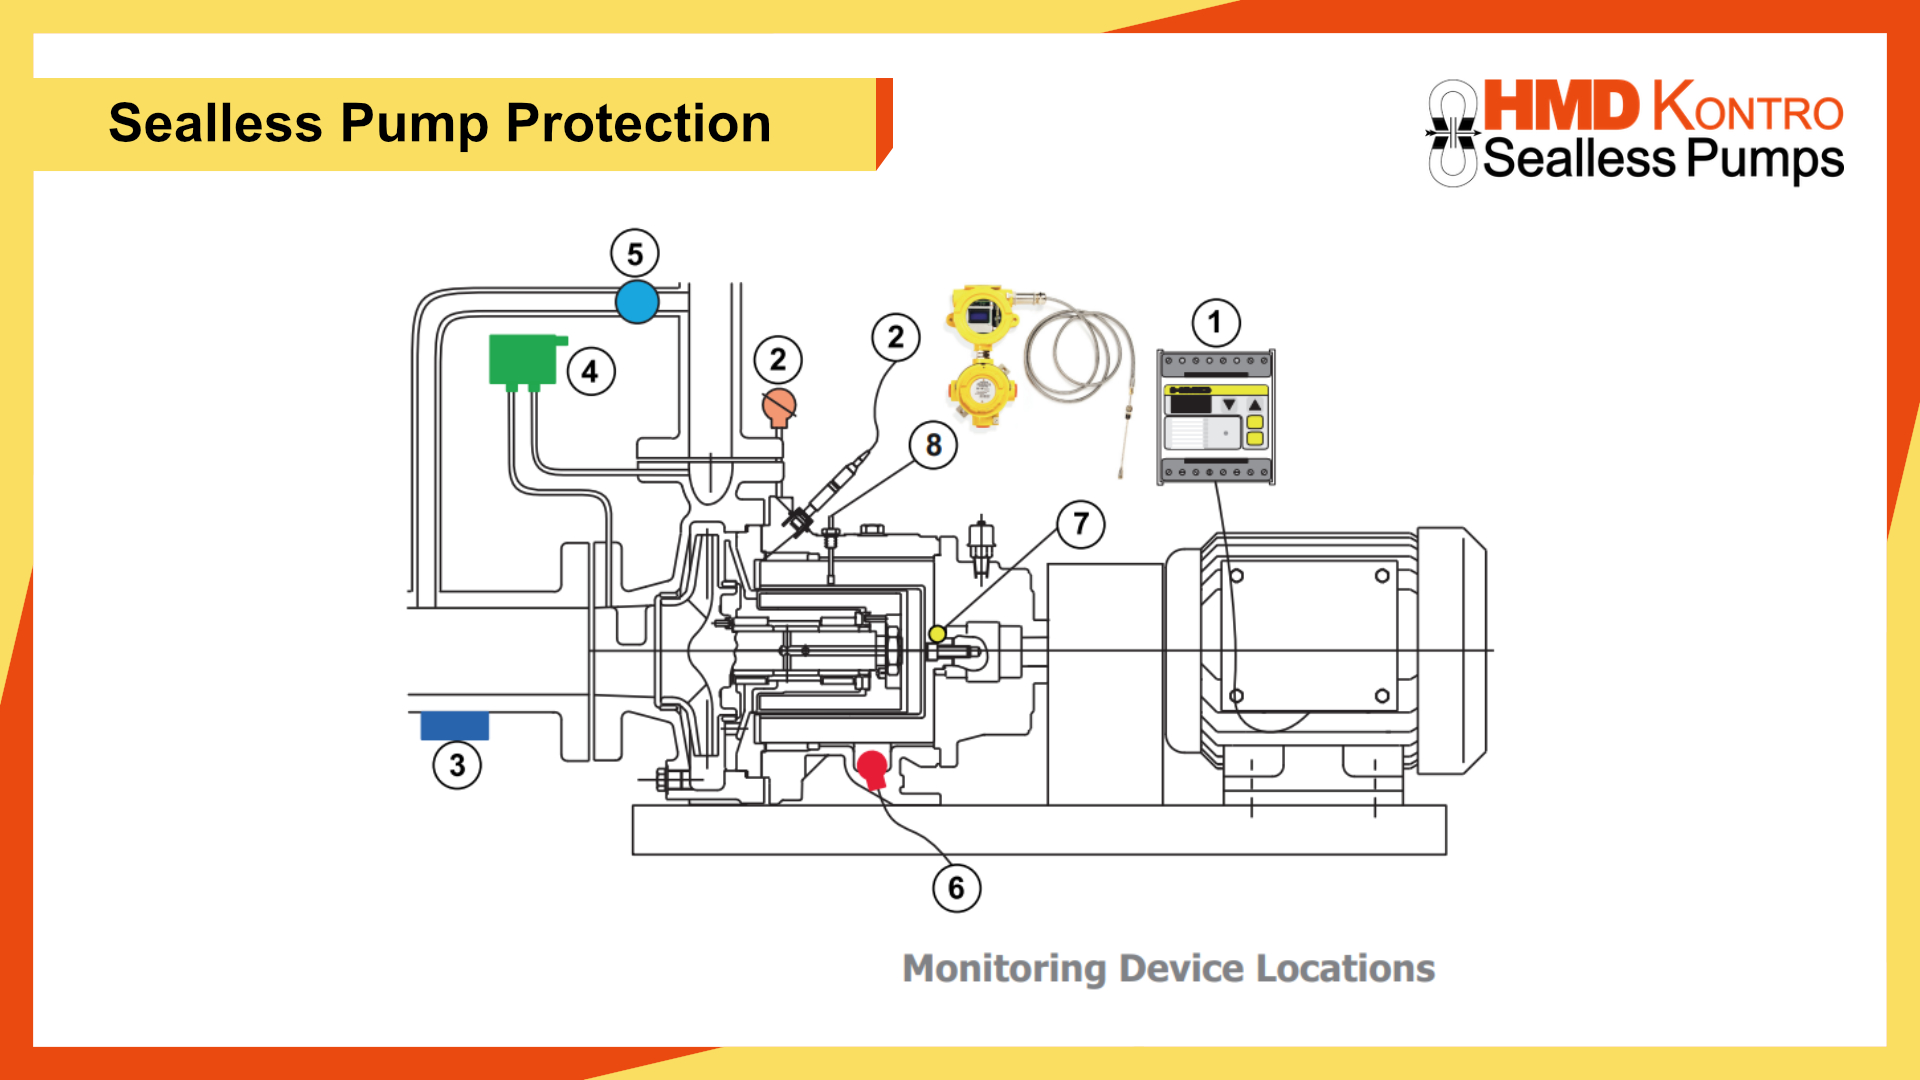 Monitoring Device Locations